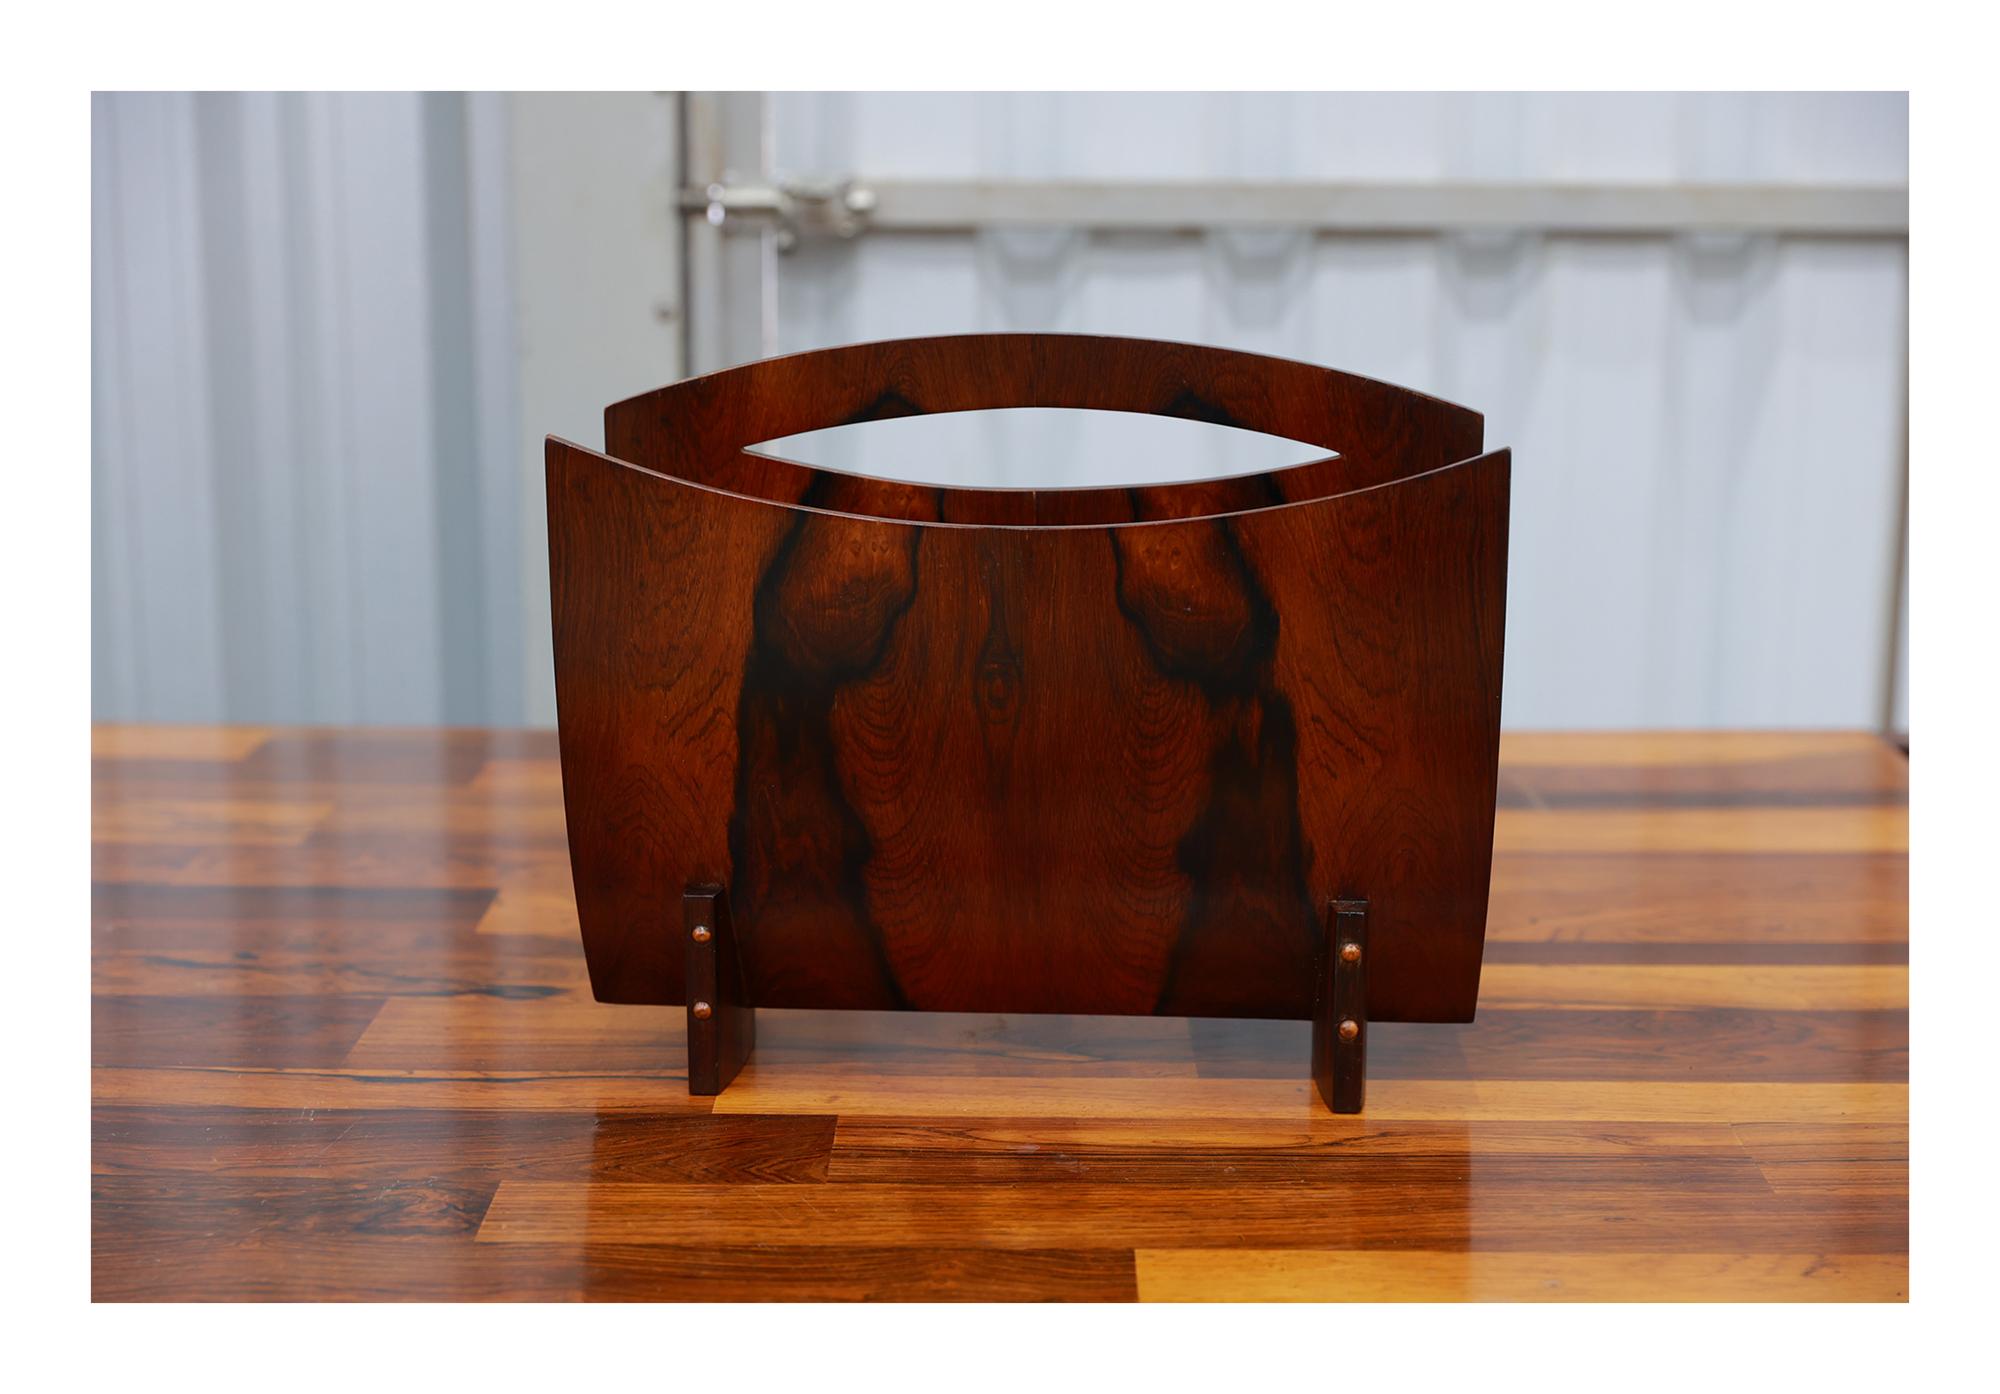 Available today, this Brazilian Modern Magazine Rack in Hardwood made in the sixties is nothing less than spectacular.

The magazine rack is made with Brazilian Rosewood which is also known as Jacaranda. It has two curved sides and a base. One of